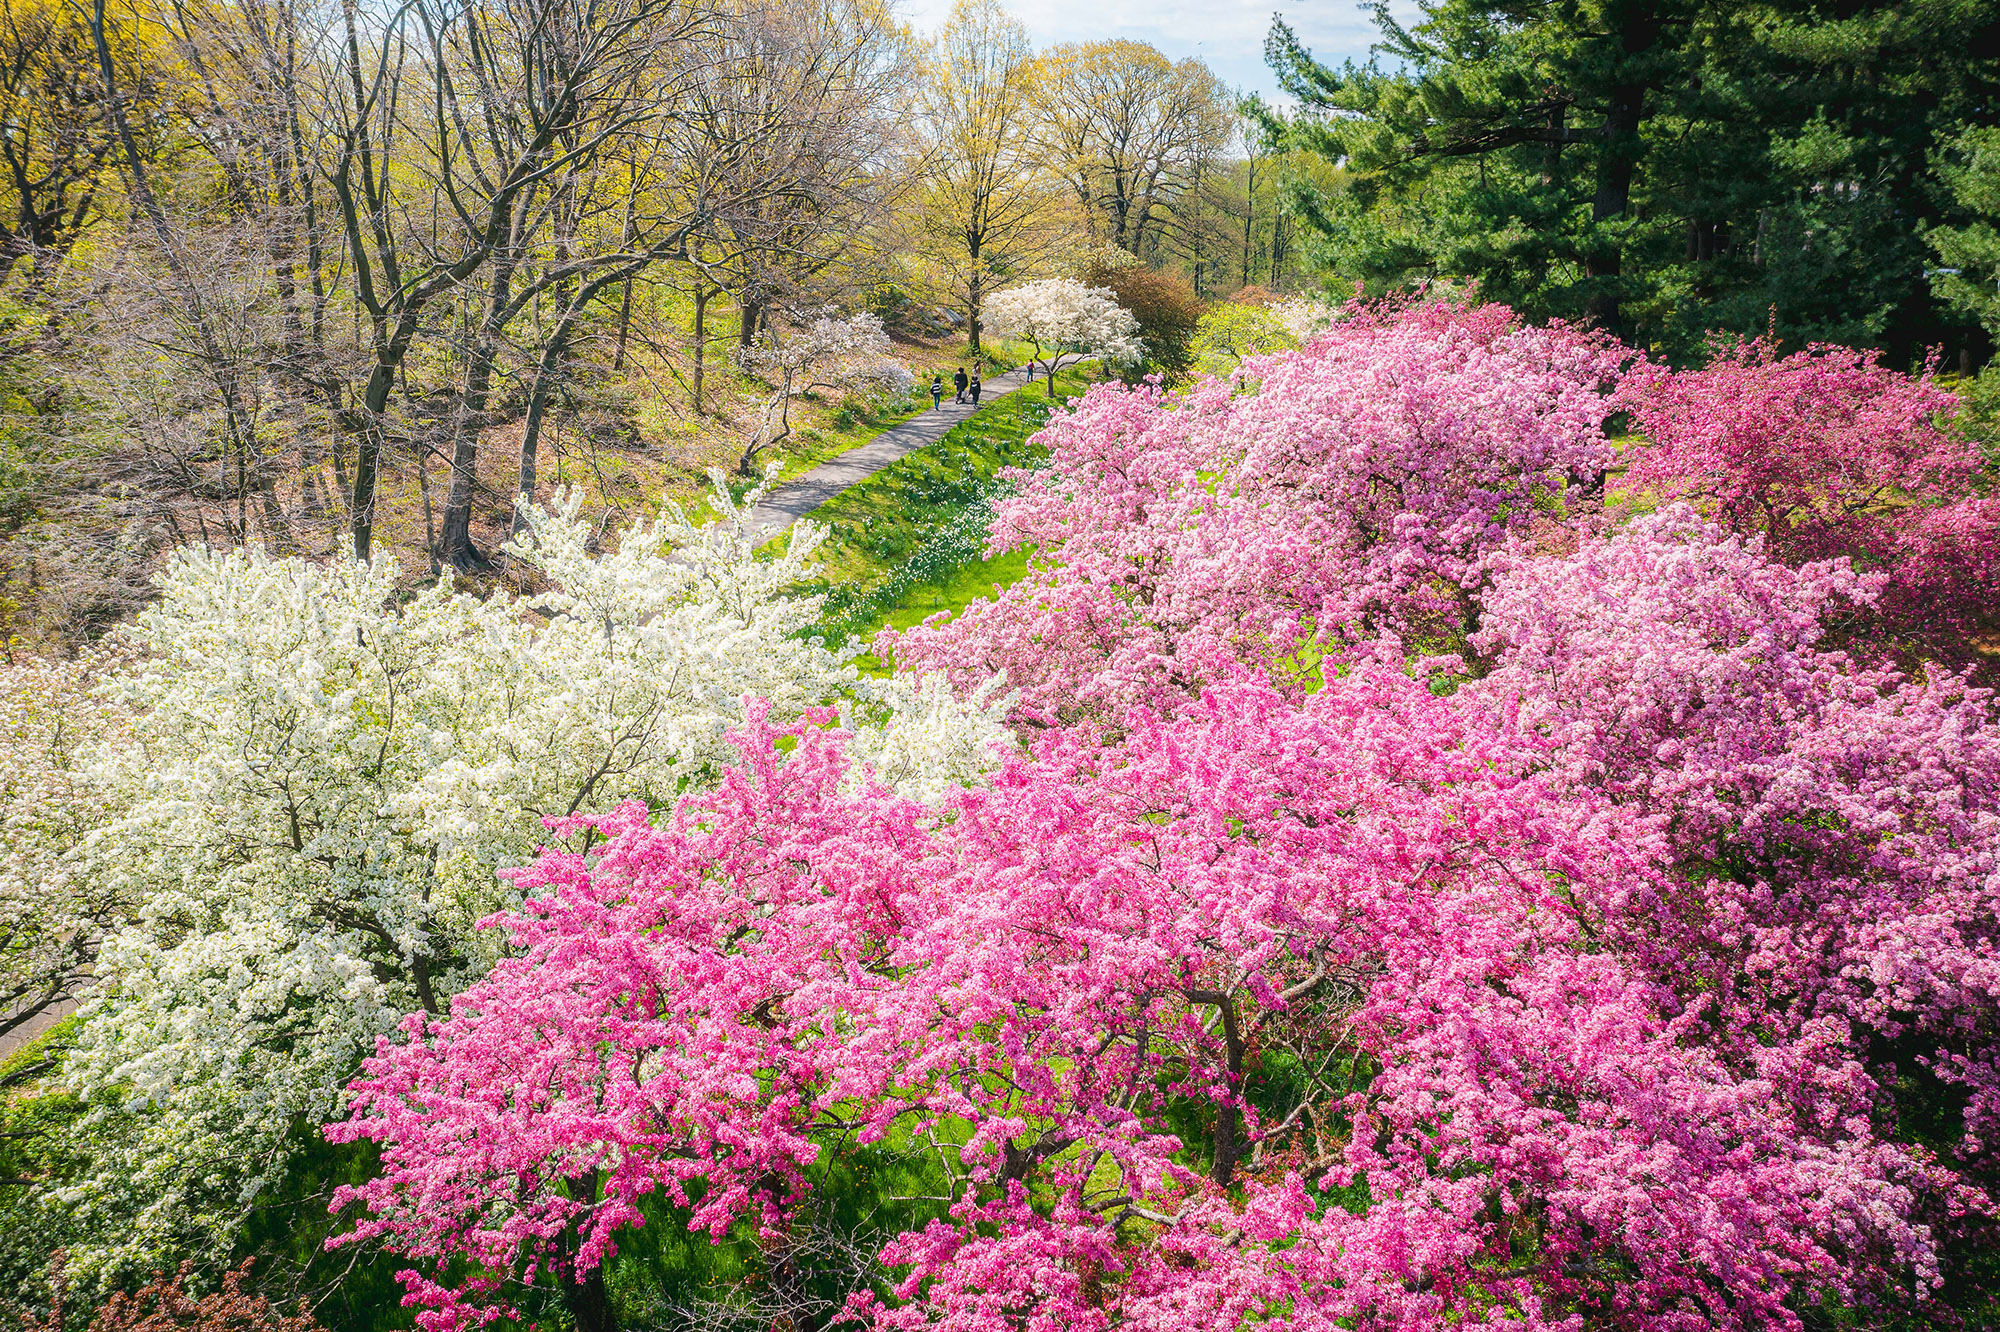 An aerial view of spring trees blooming in pink and white